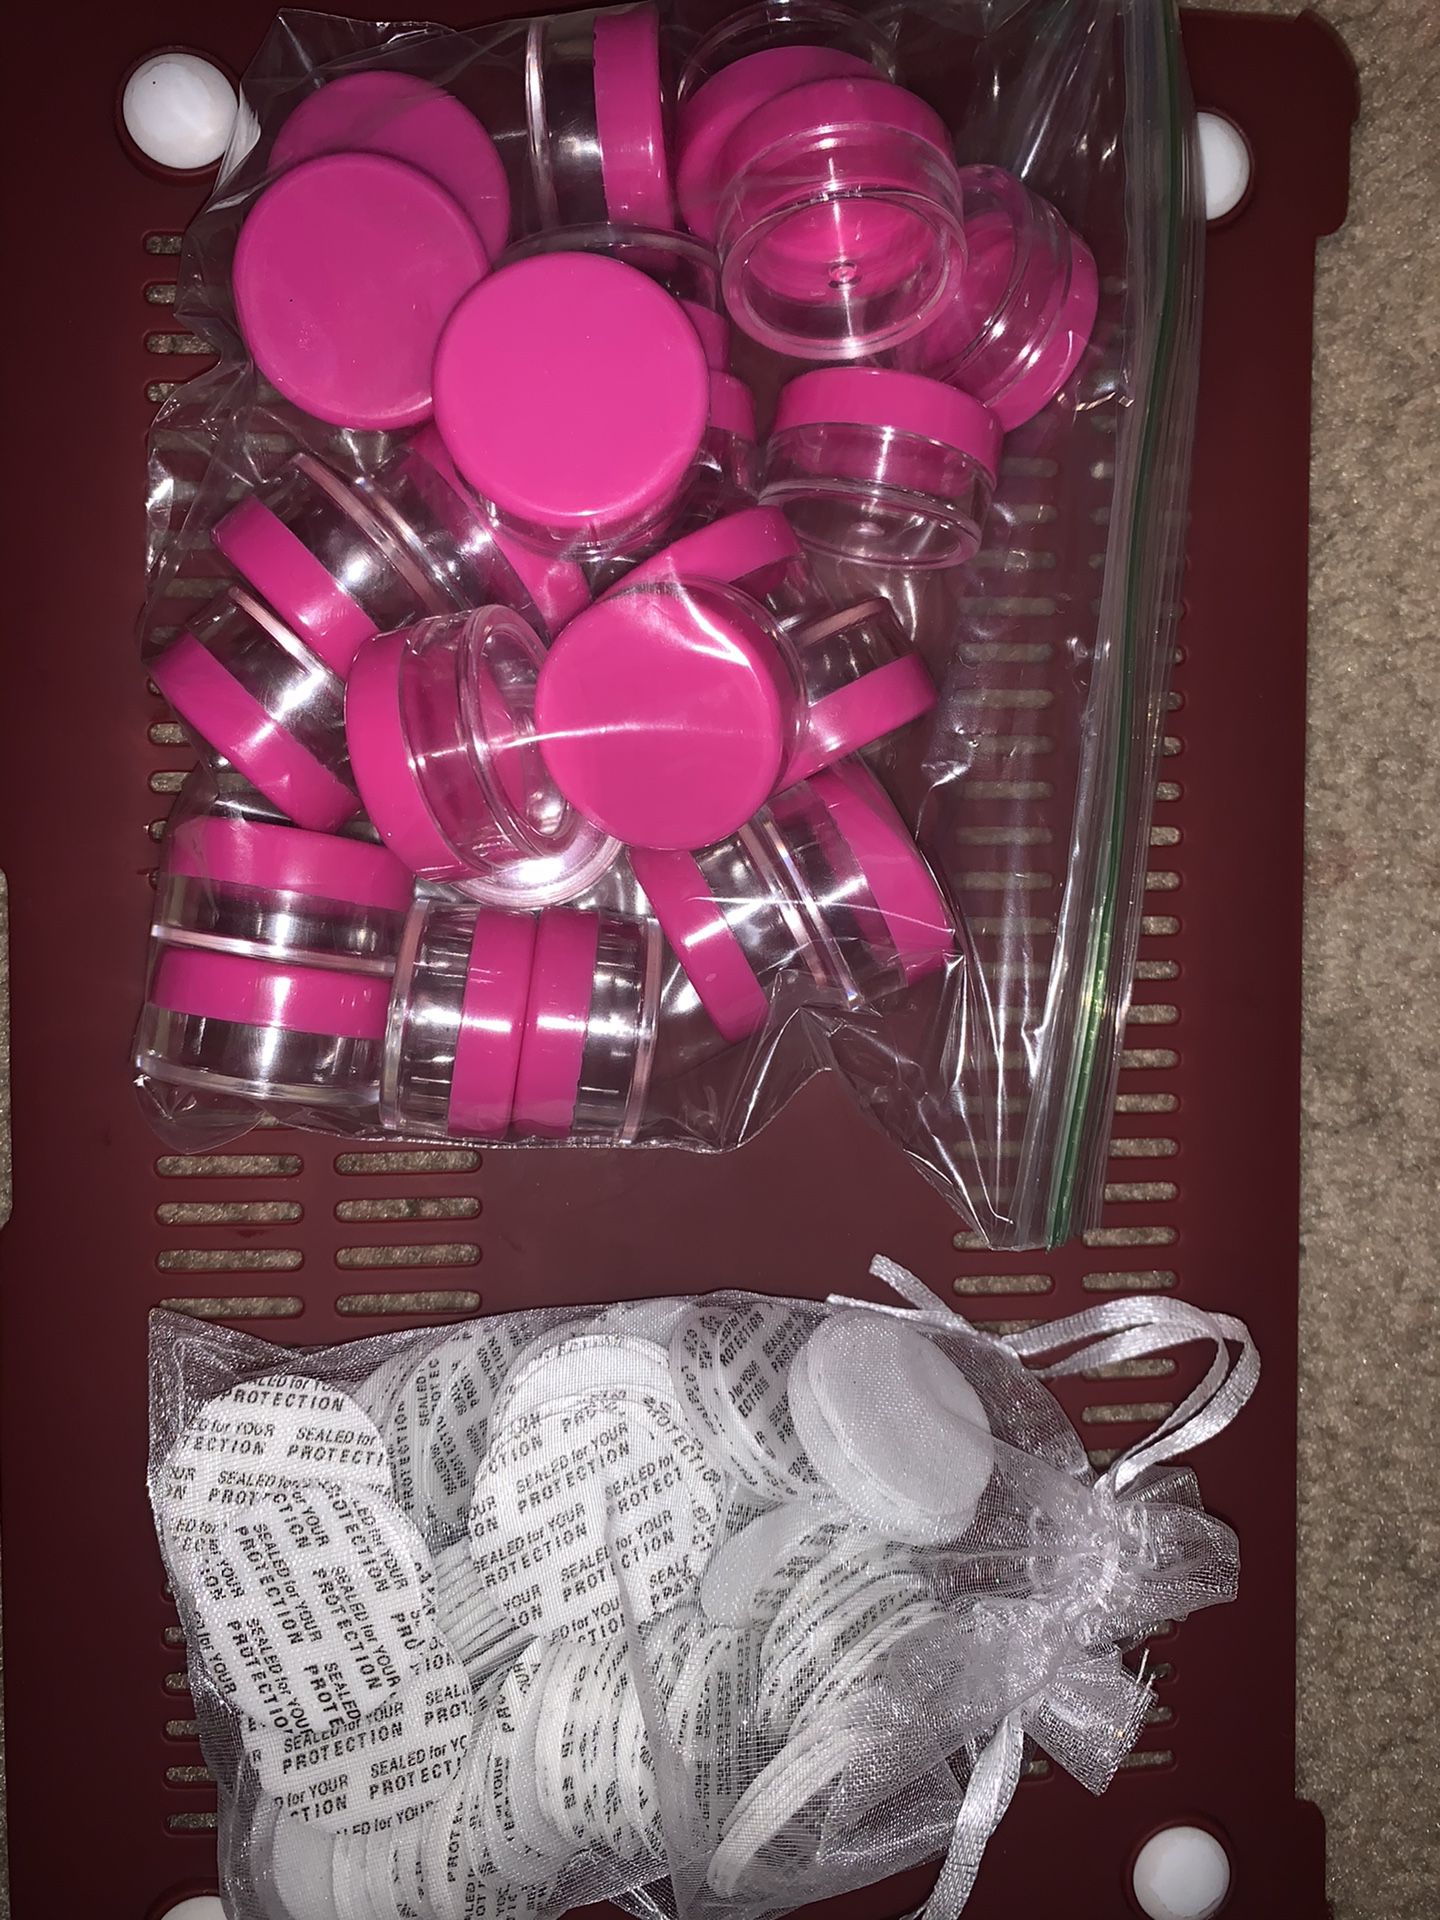 Small containers for lipglosses